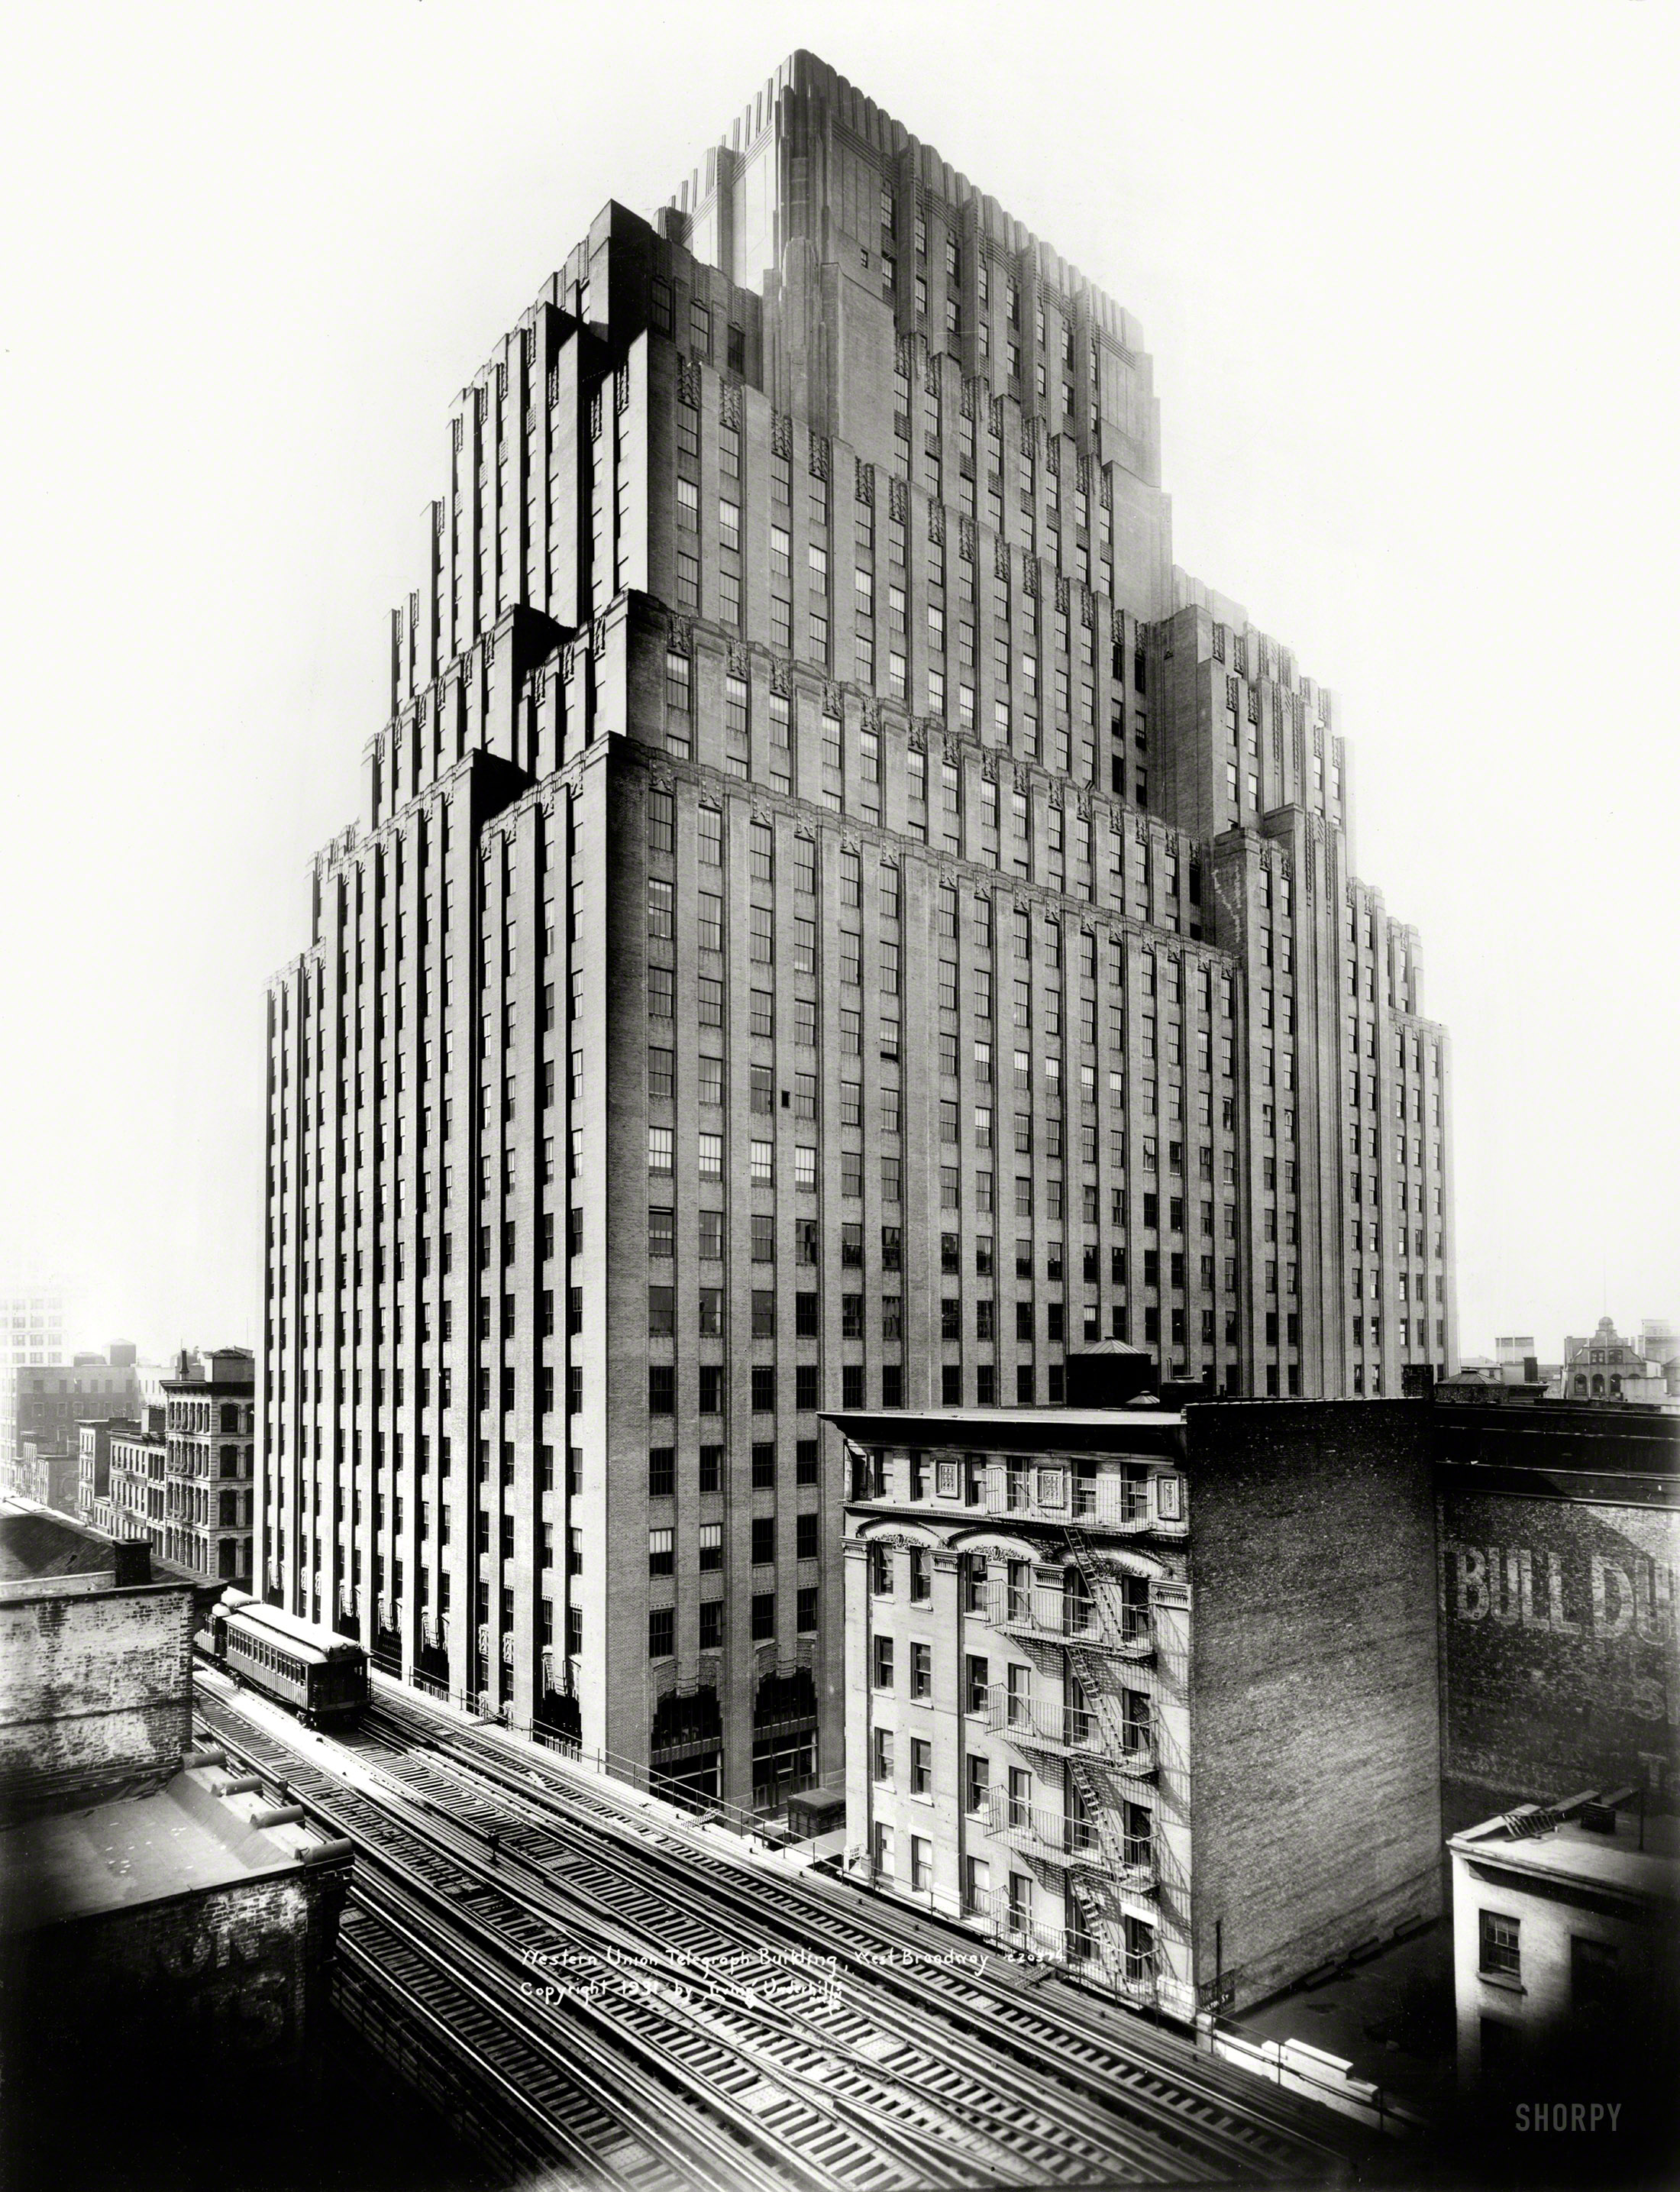 New York, 1931. "Western Union Telegraph Building, West Broadway. Ralph Walker, architect." The hulking Art Deco pile now known as 60 Hudson Street, a TriBeCa landmark. Photo by Irving Underhill. View full size.